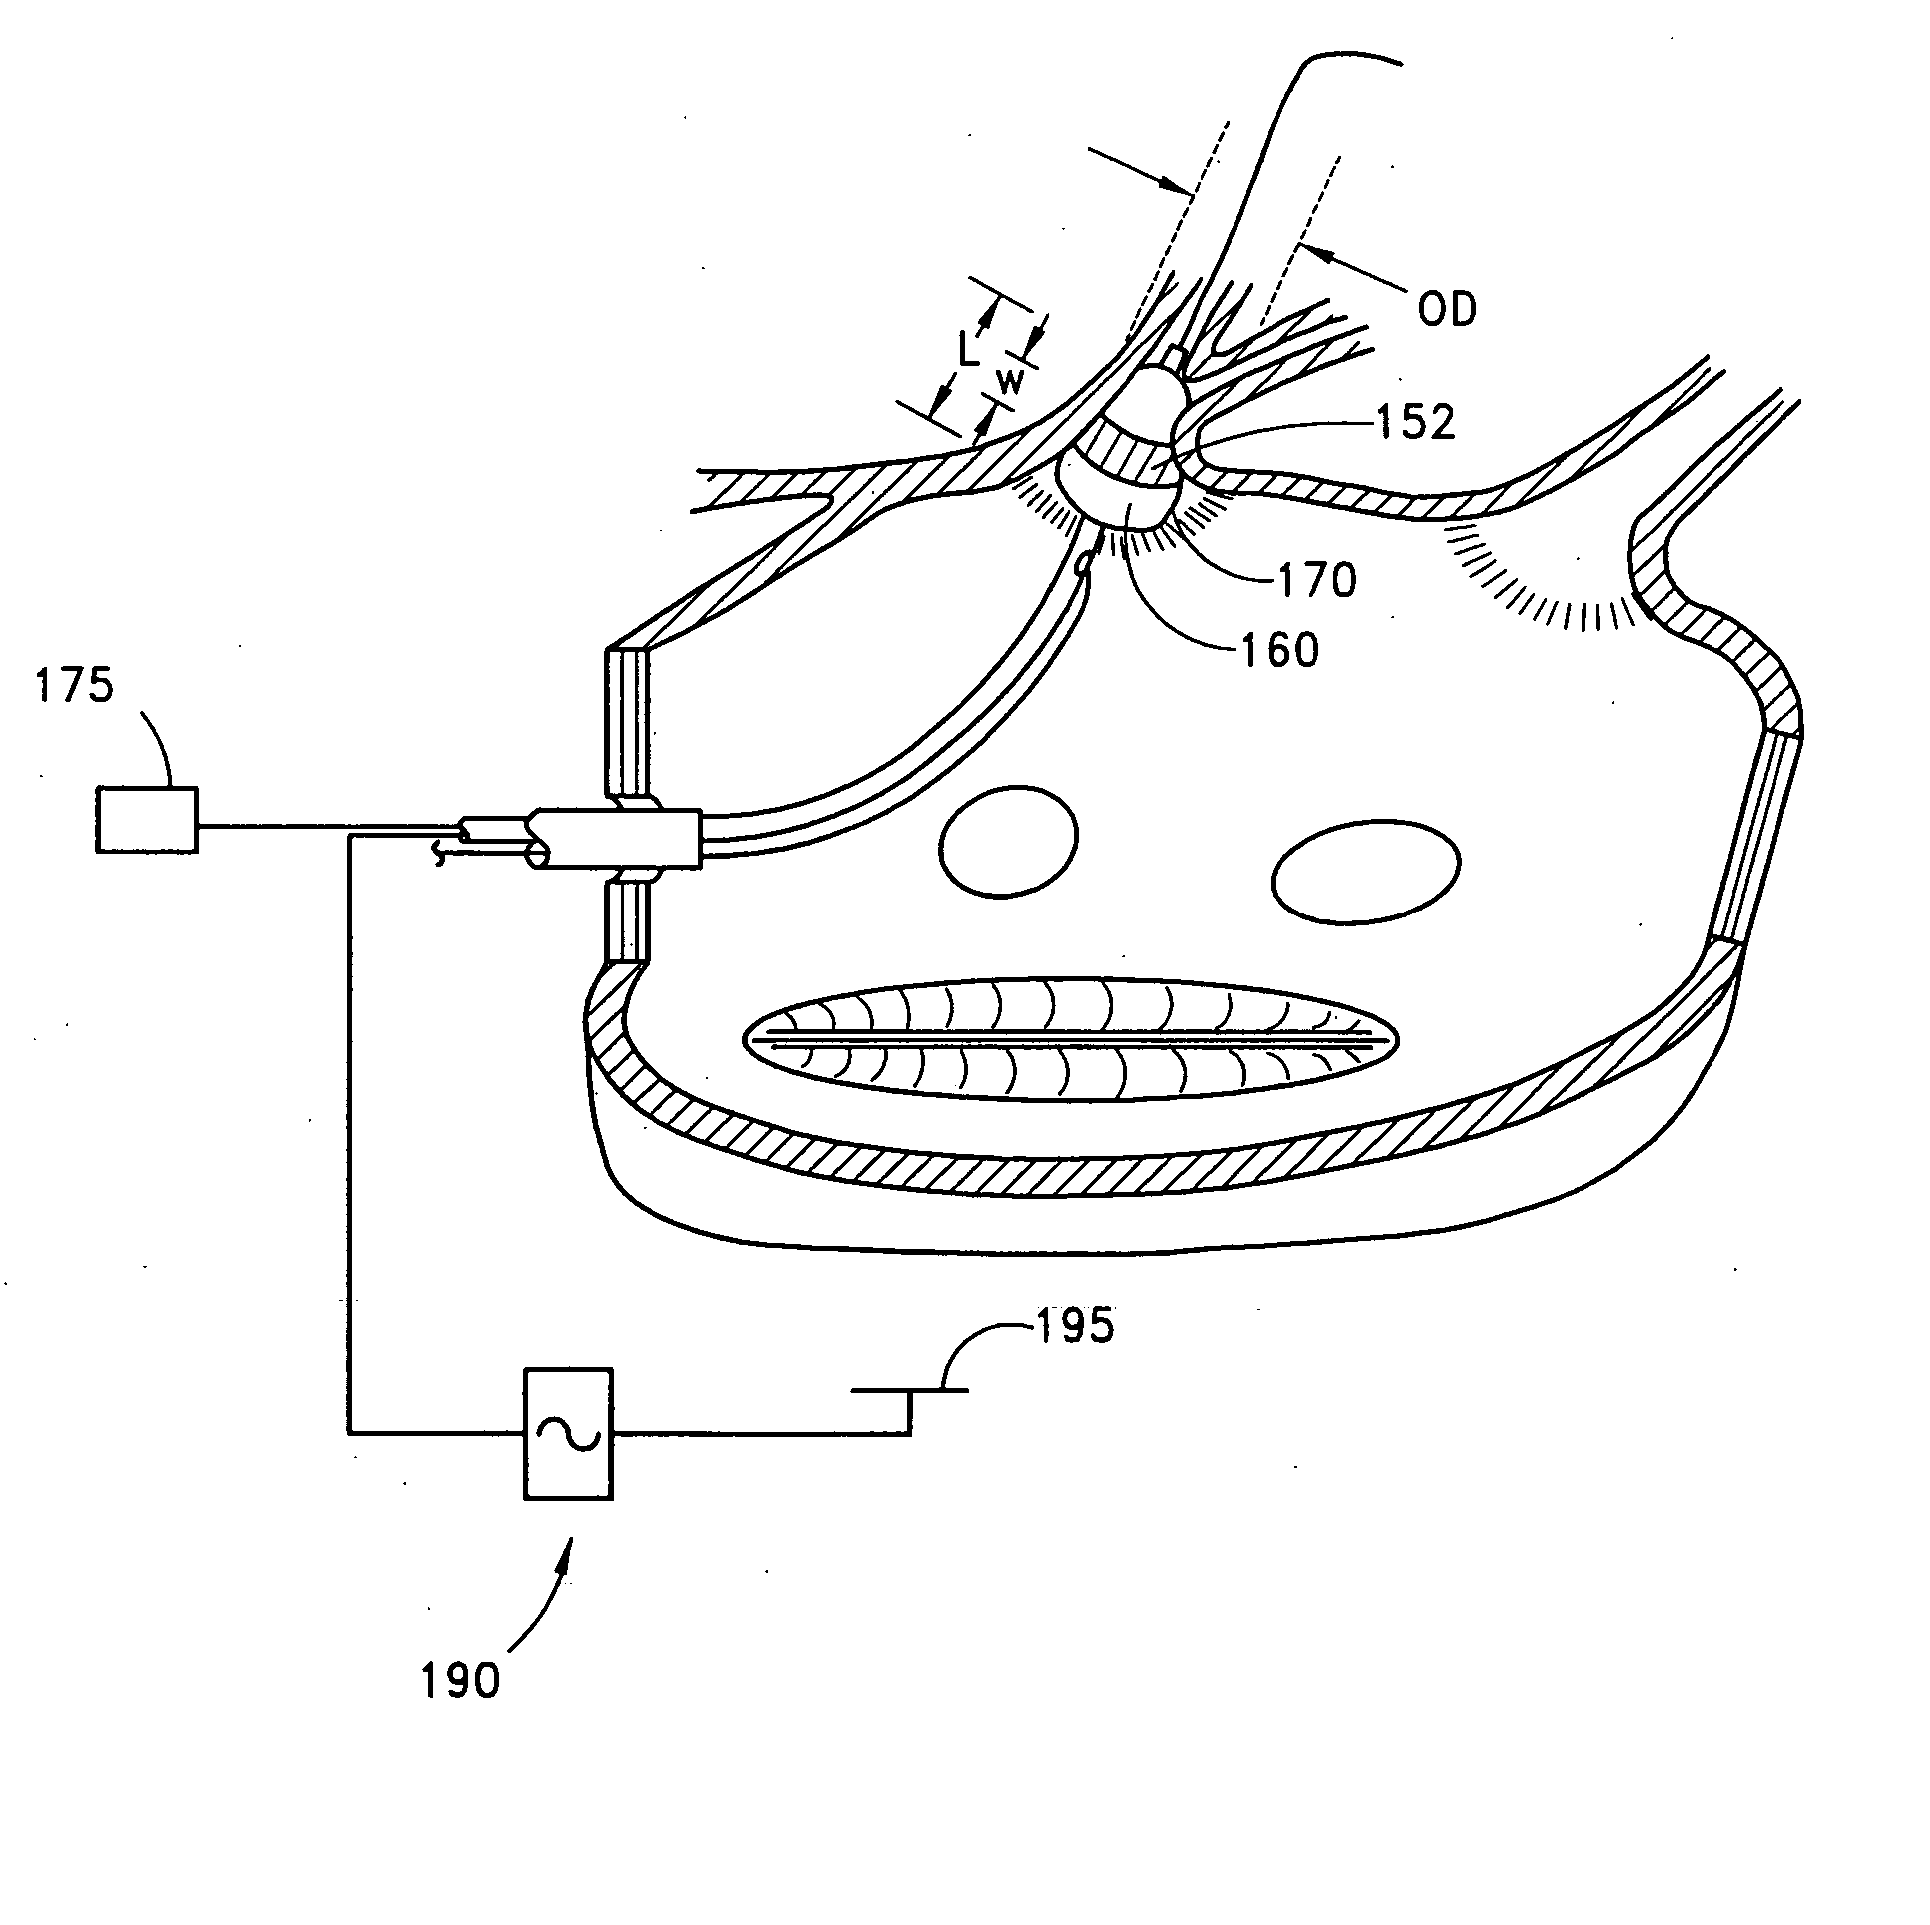 Circumferential ablation device assembly